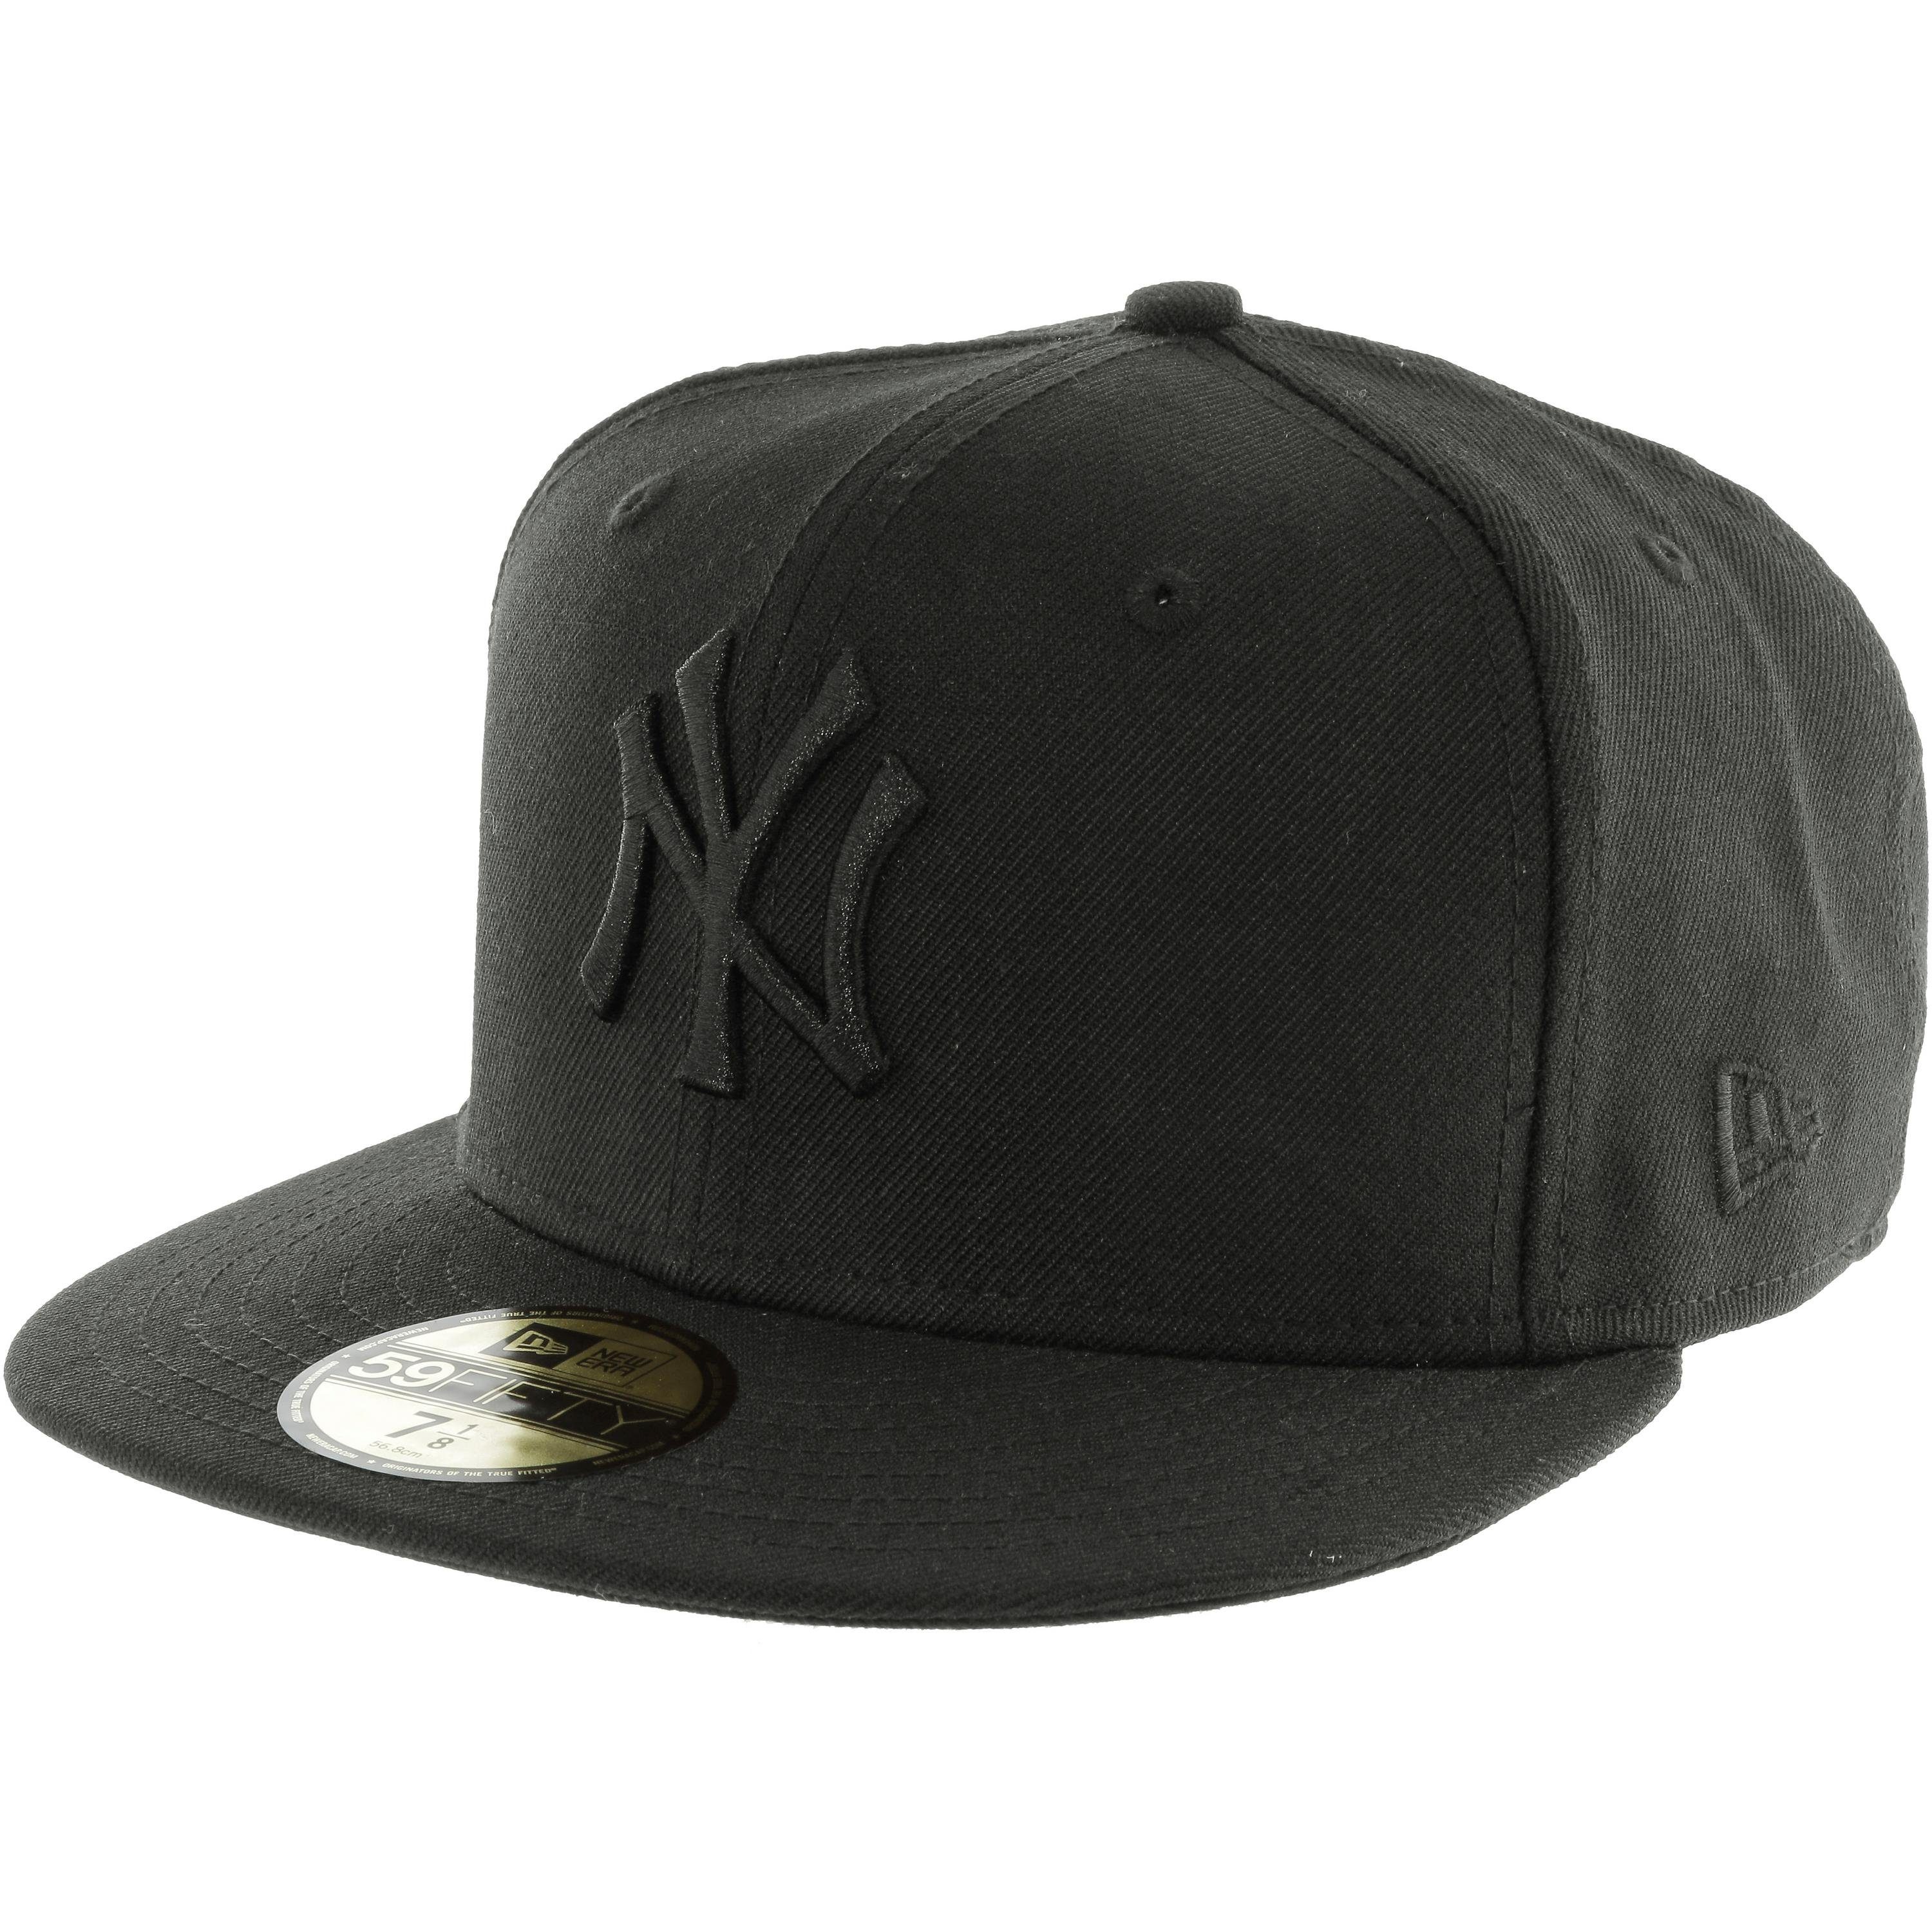 NY schwarz Yankees Fitted 59fifty Era Cap New